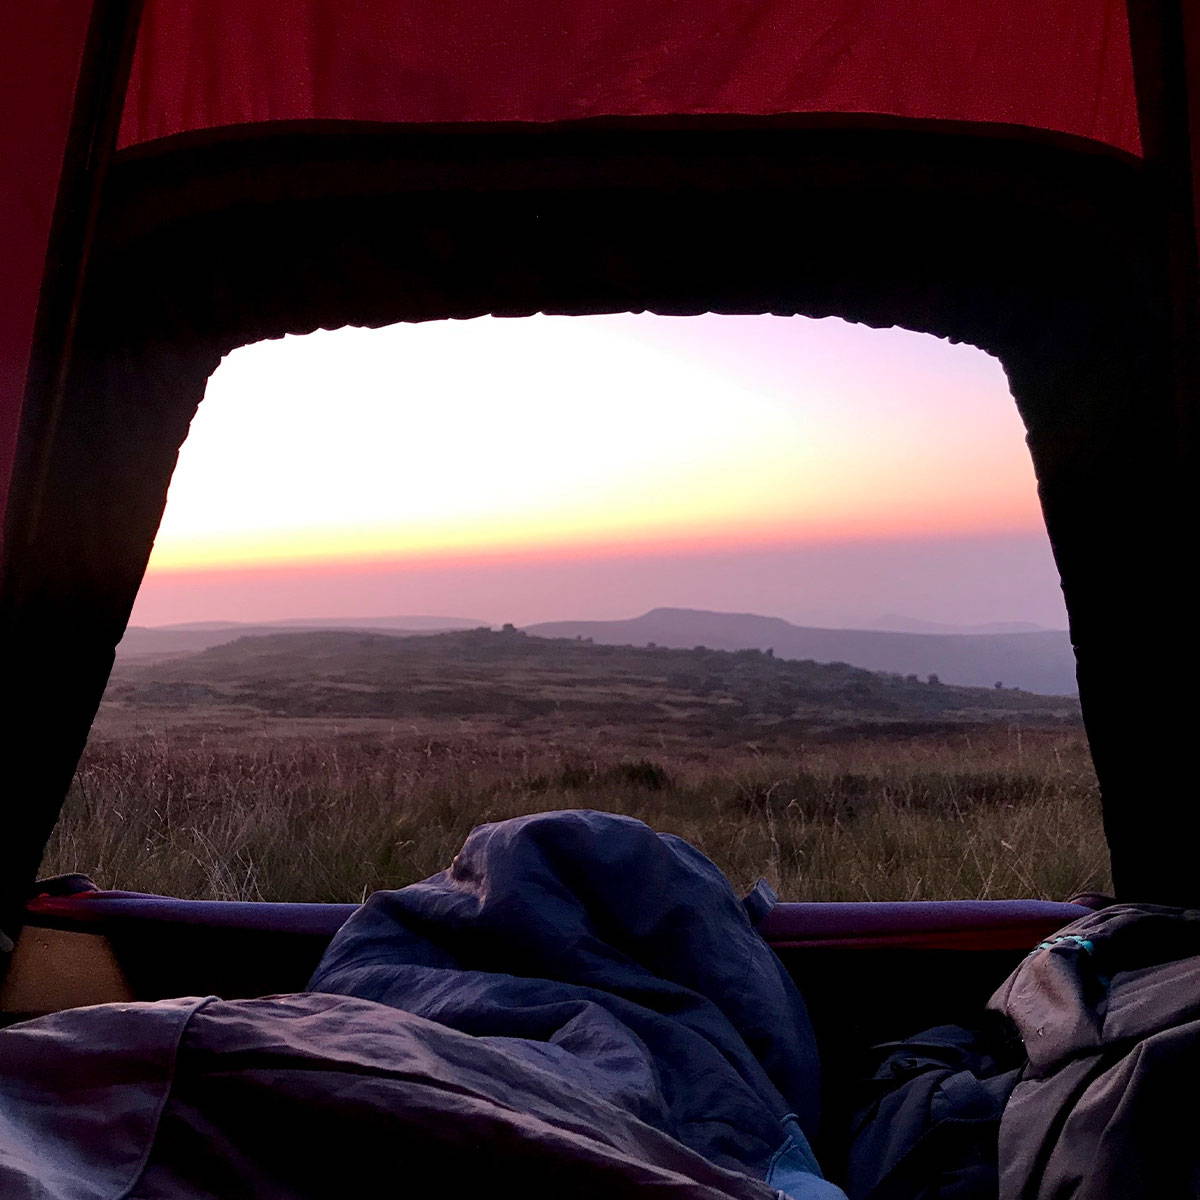 An image showing a beautiful view from inside a tent whilst wild camping. Taken by 3RD ROCK's creative director Grace.